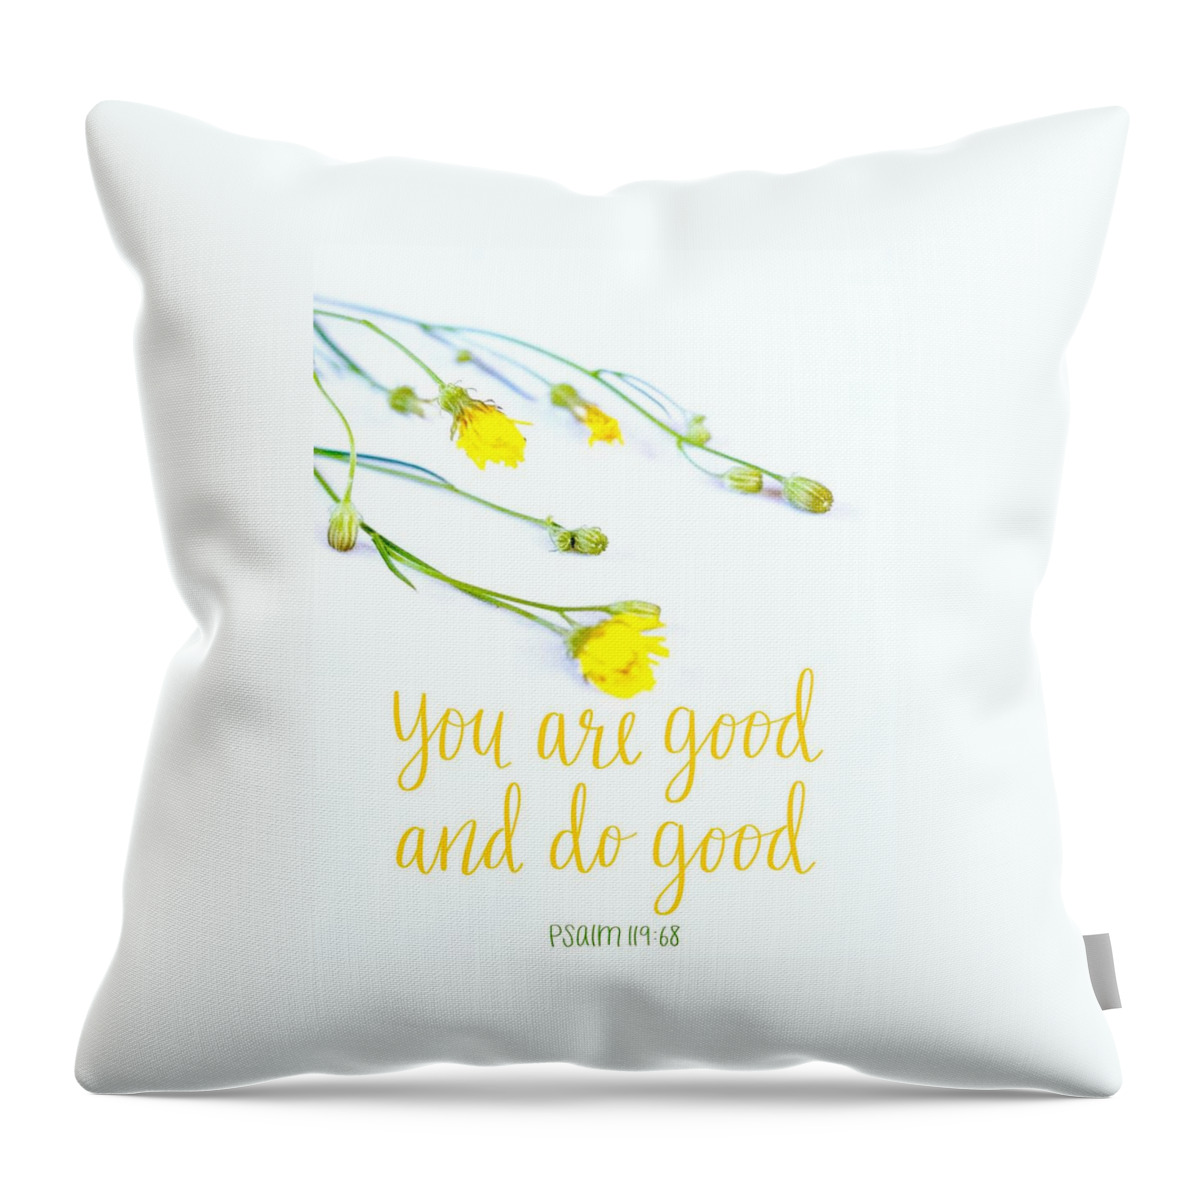  Throw Pillow featuring the digital art You are Good and do good by Stephanie Fritz